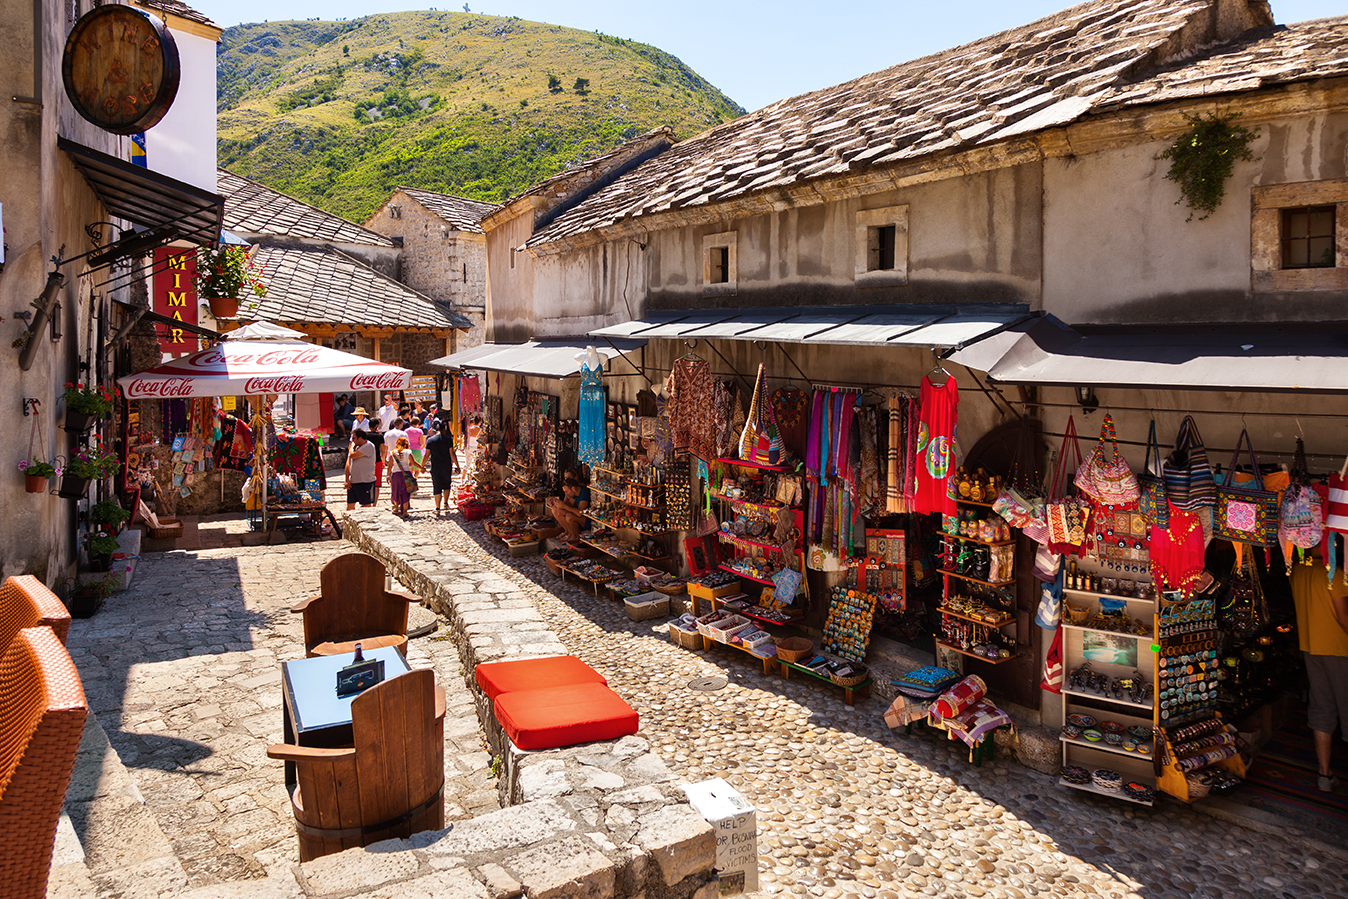 People walking through the Old Town with many shops and cafes on July 20, 2014 in Mostar, Bosnia and Herzegovina. Mostar is situated on the Neretva River.